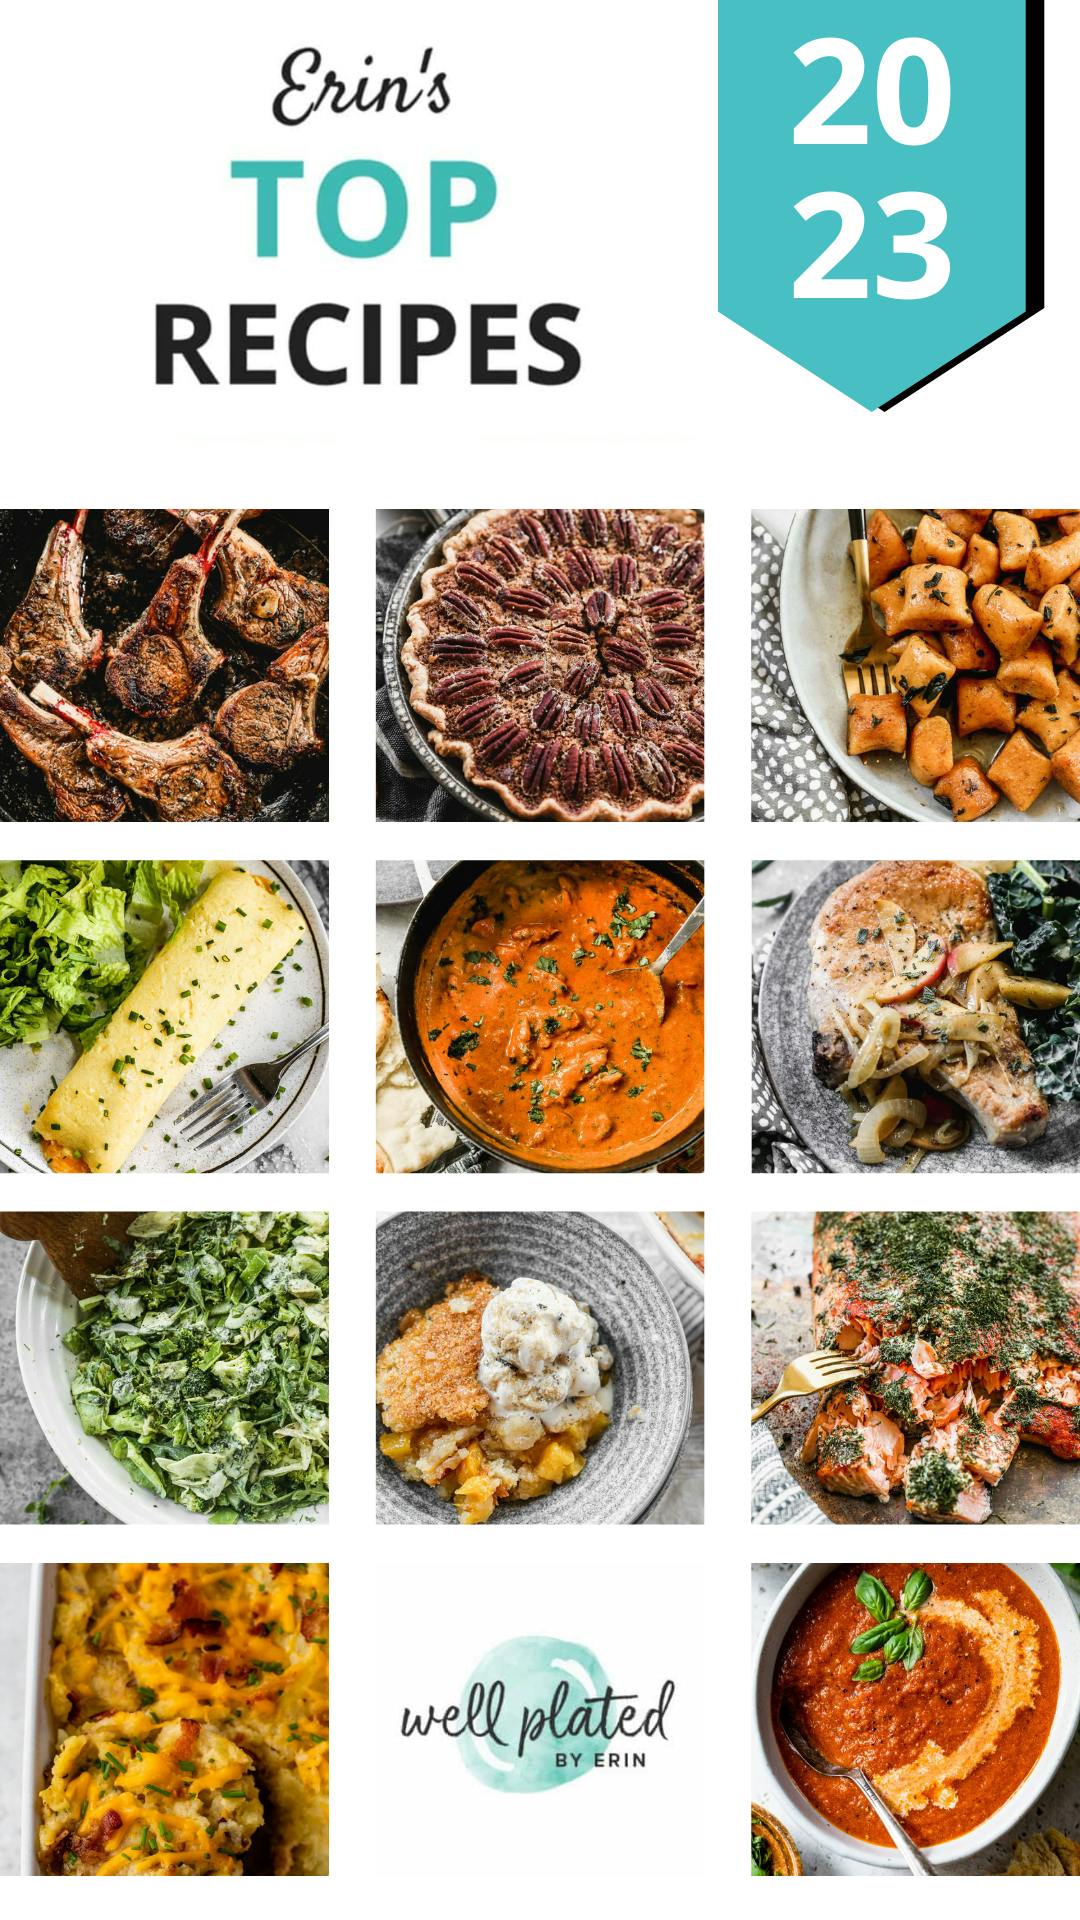 A collage of recipe images